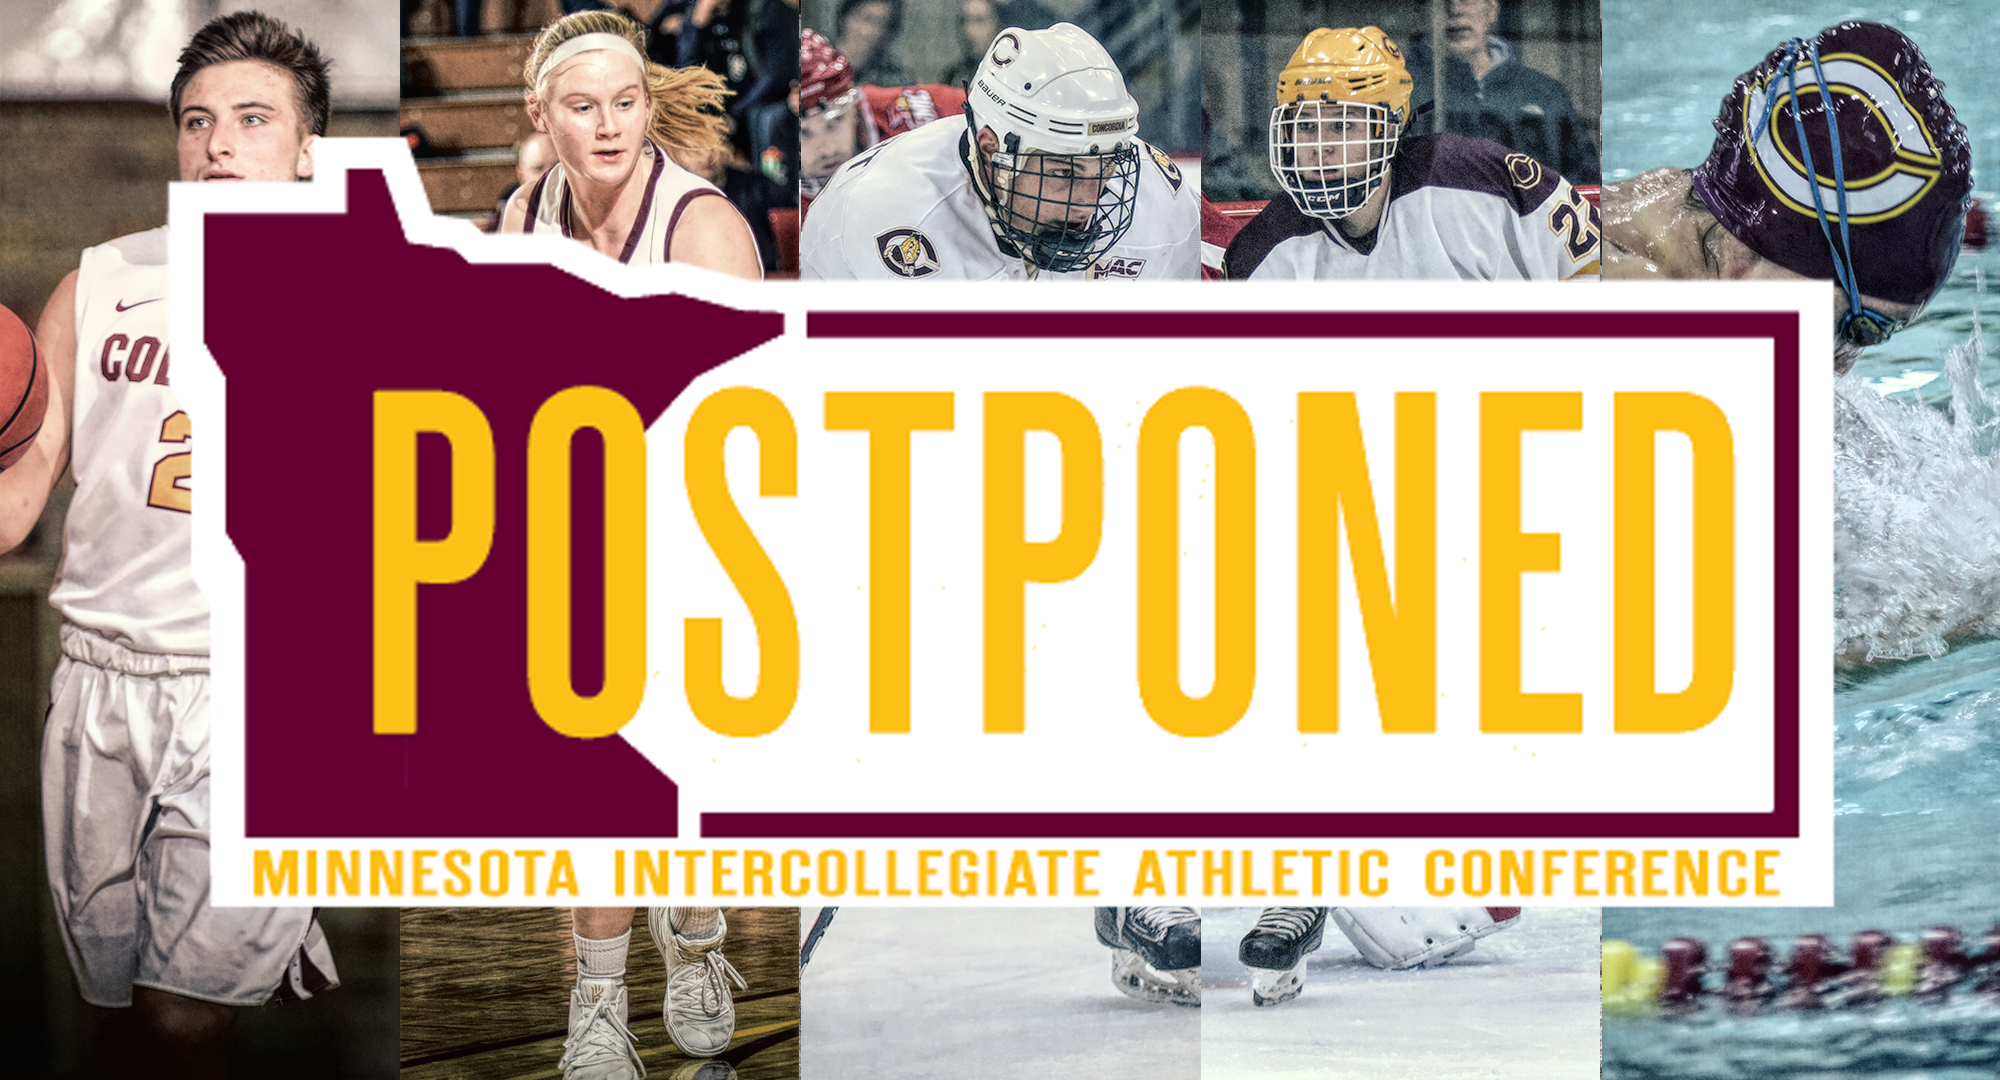 The MIAC announced that all athletic competition has been postponed until January of 2021 due to the Covid-19 pandemic. (All pics taken in 2019-20)